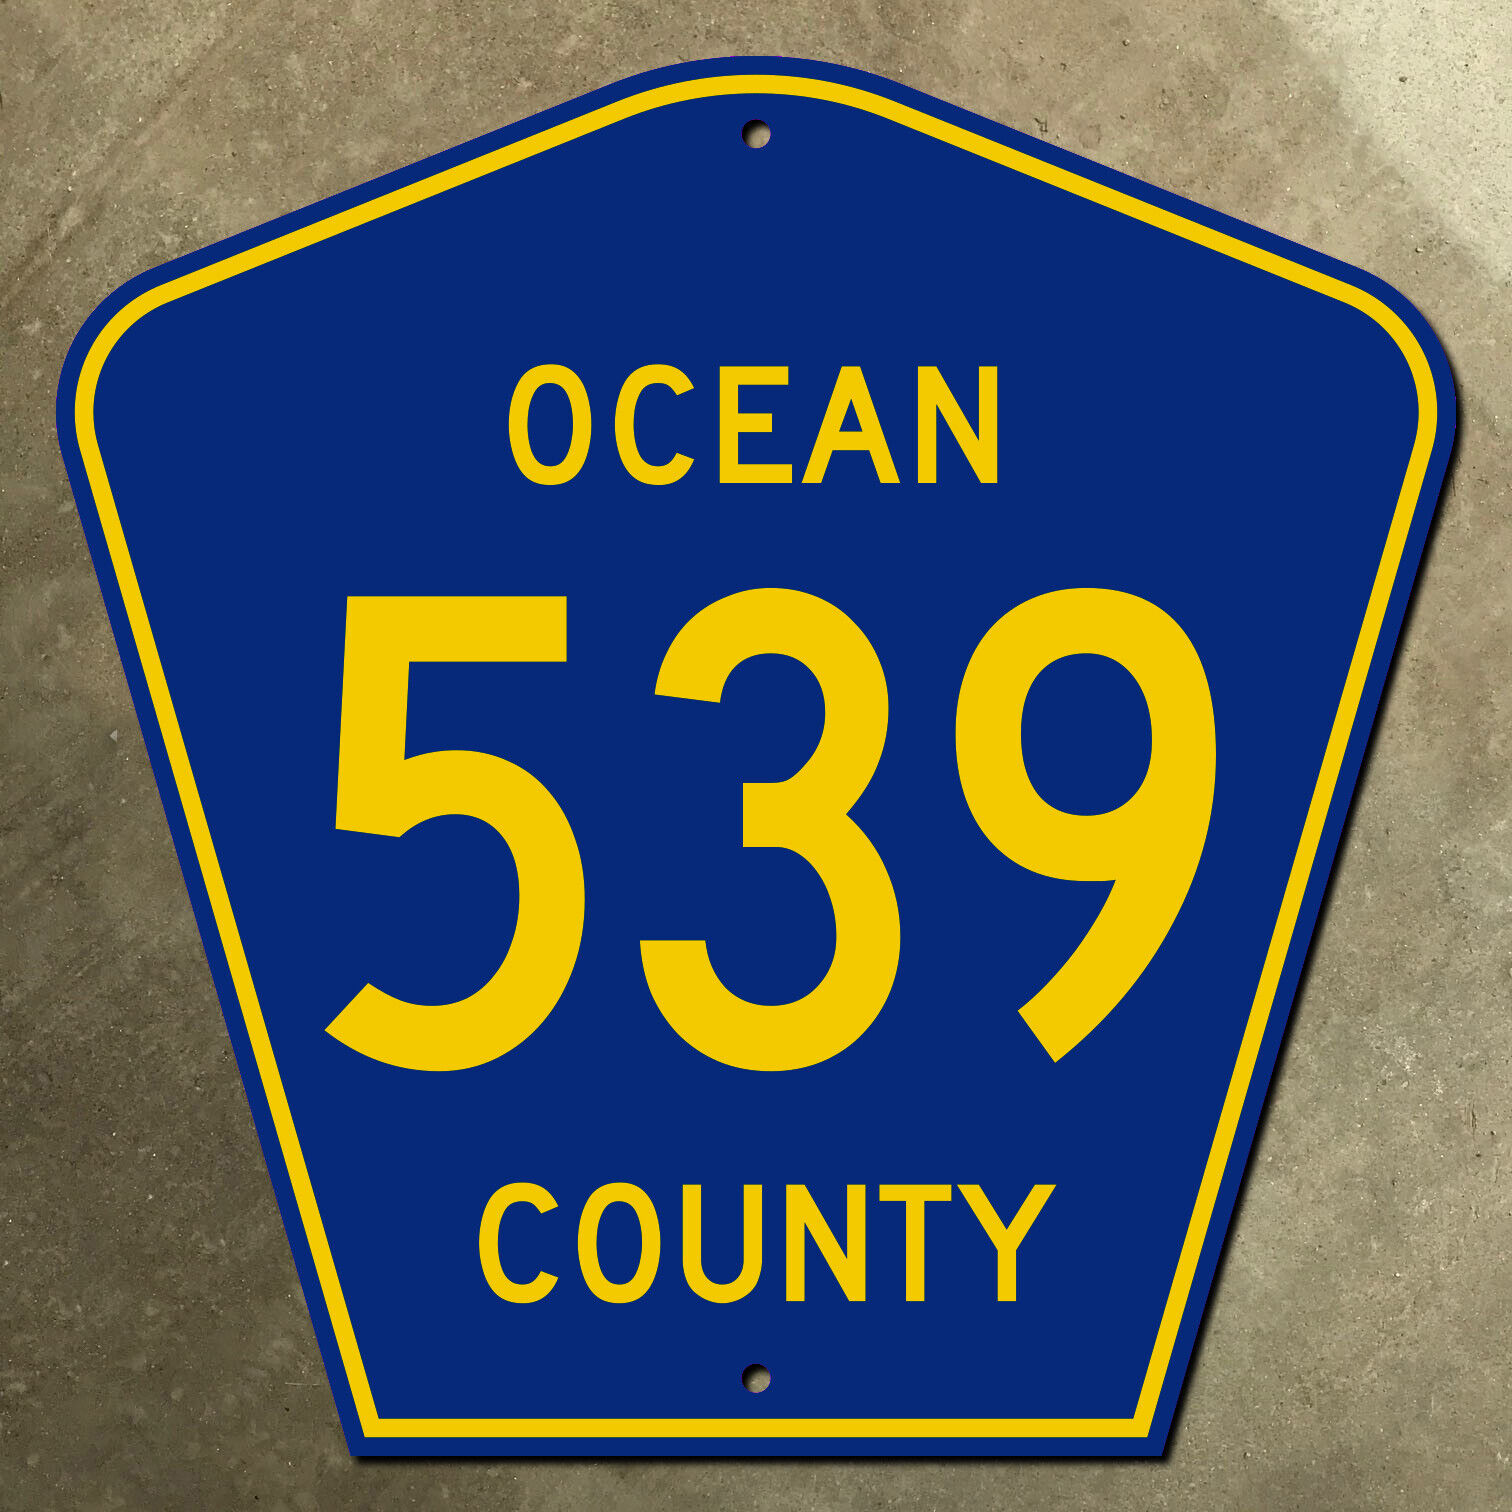 New Jersey Shore Ocean County route 539 highway marker road sign 1959 24x24